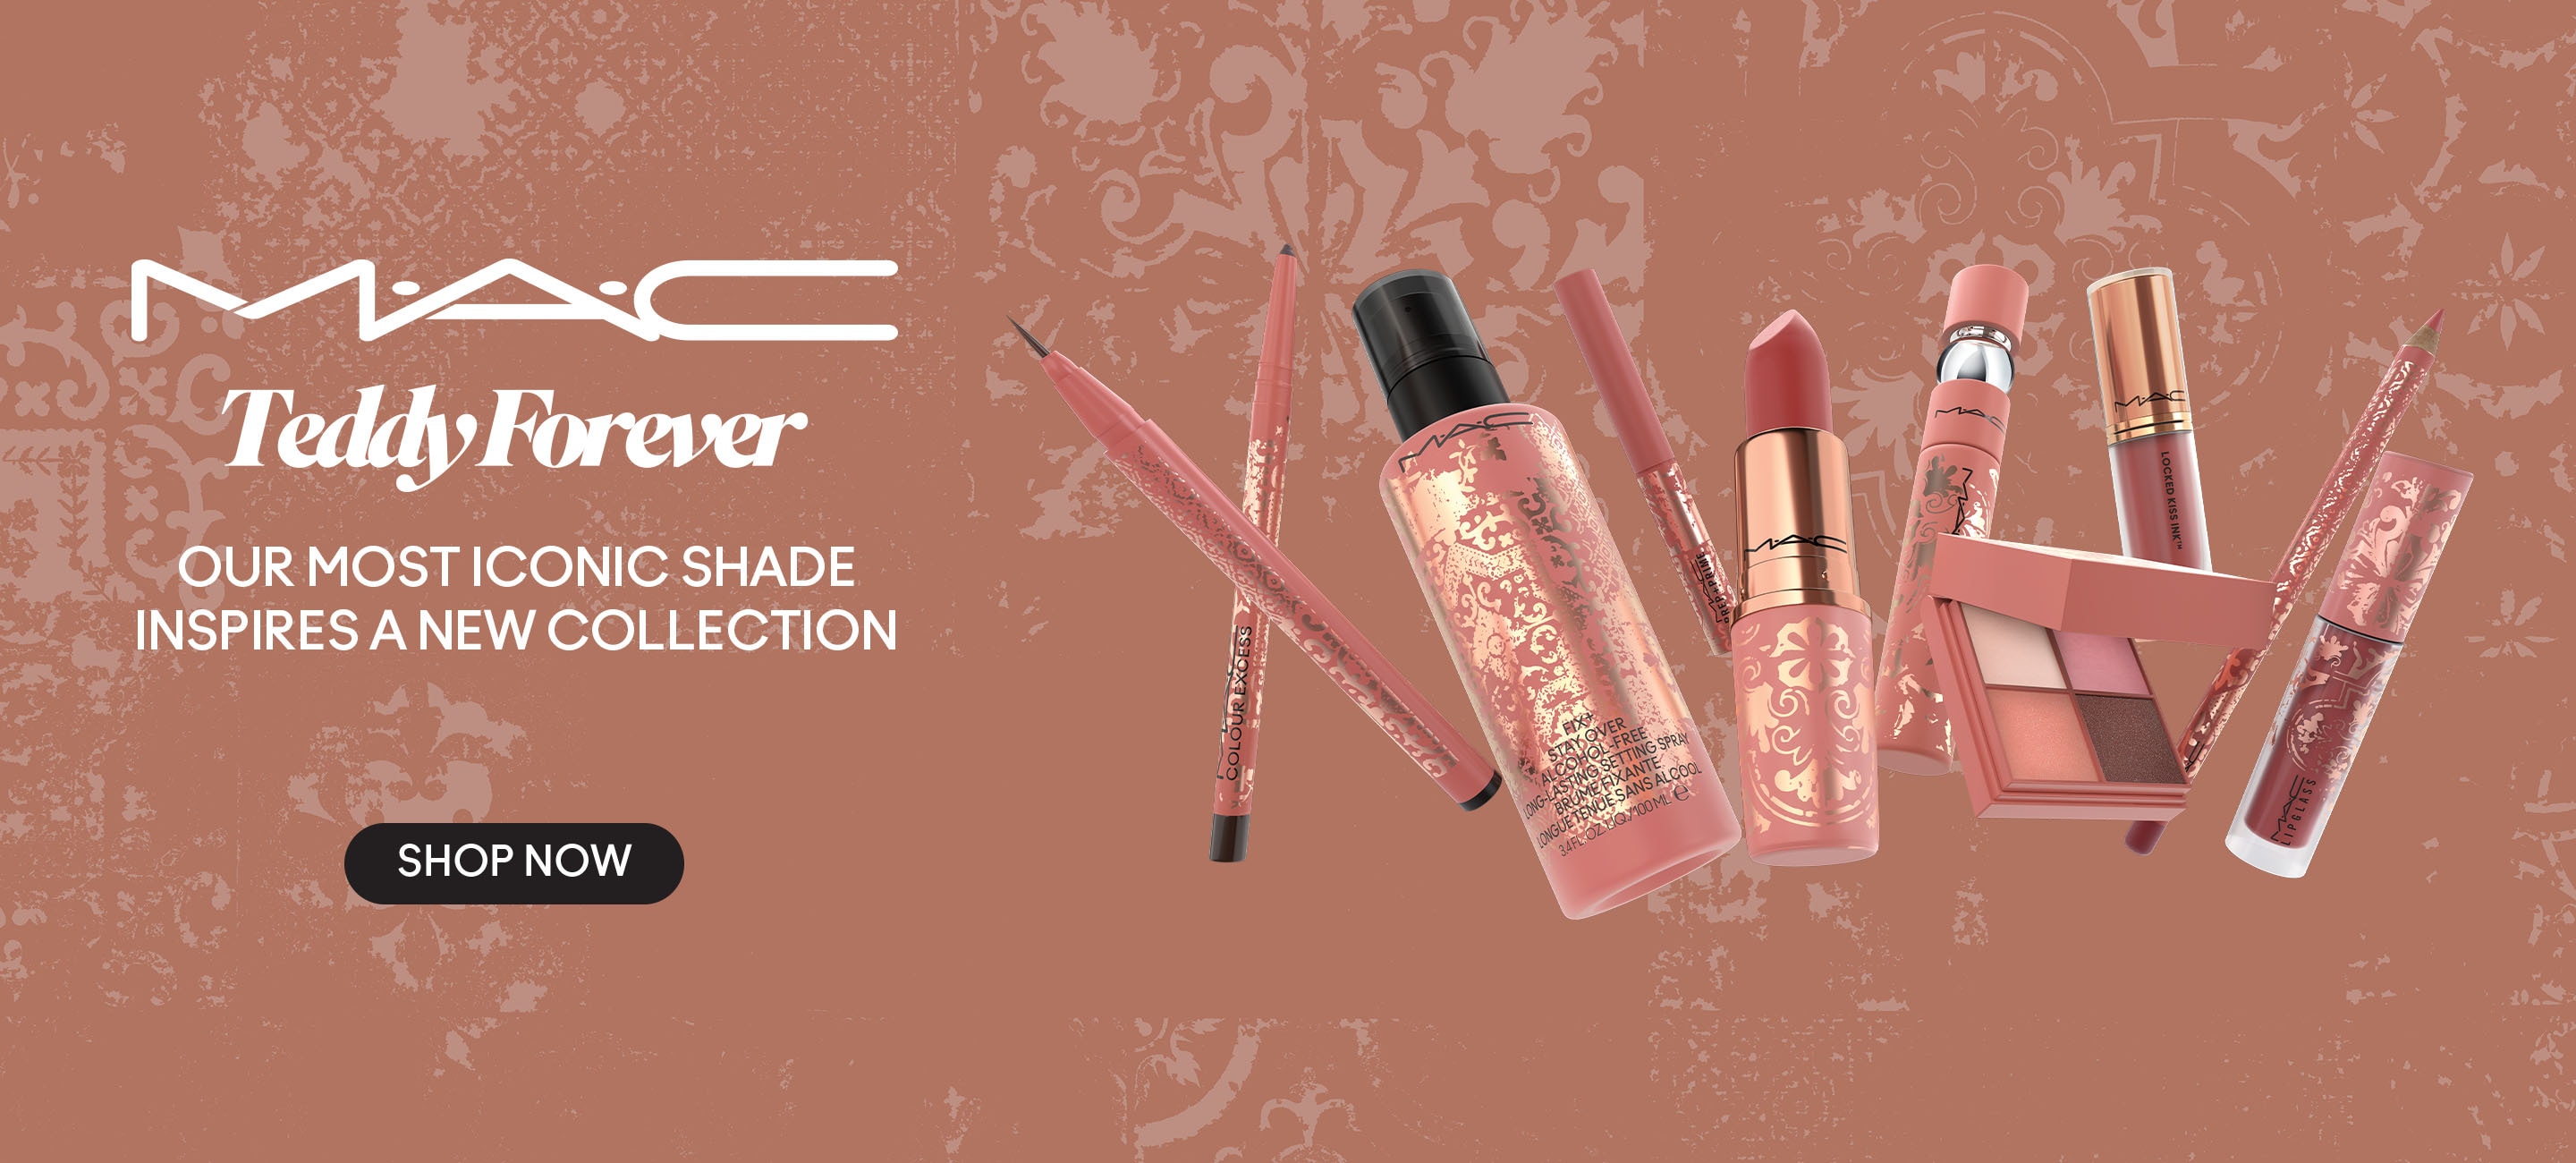 Teddy Forever Limited Edition Collection - Bestselling Shade